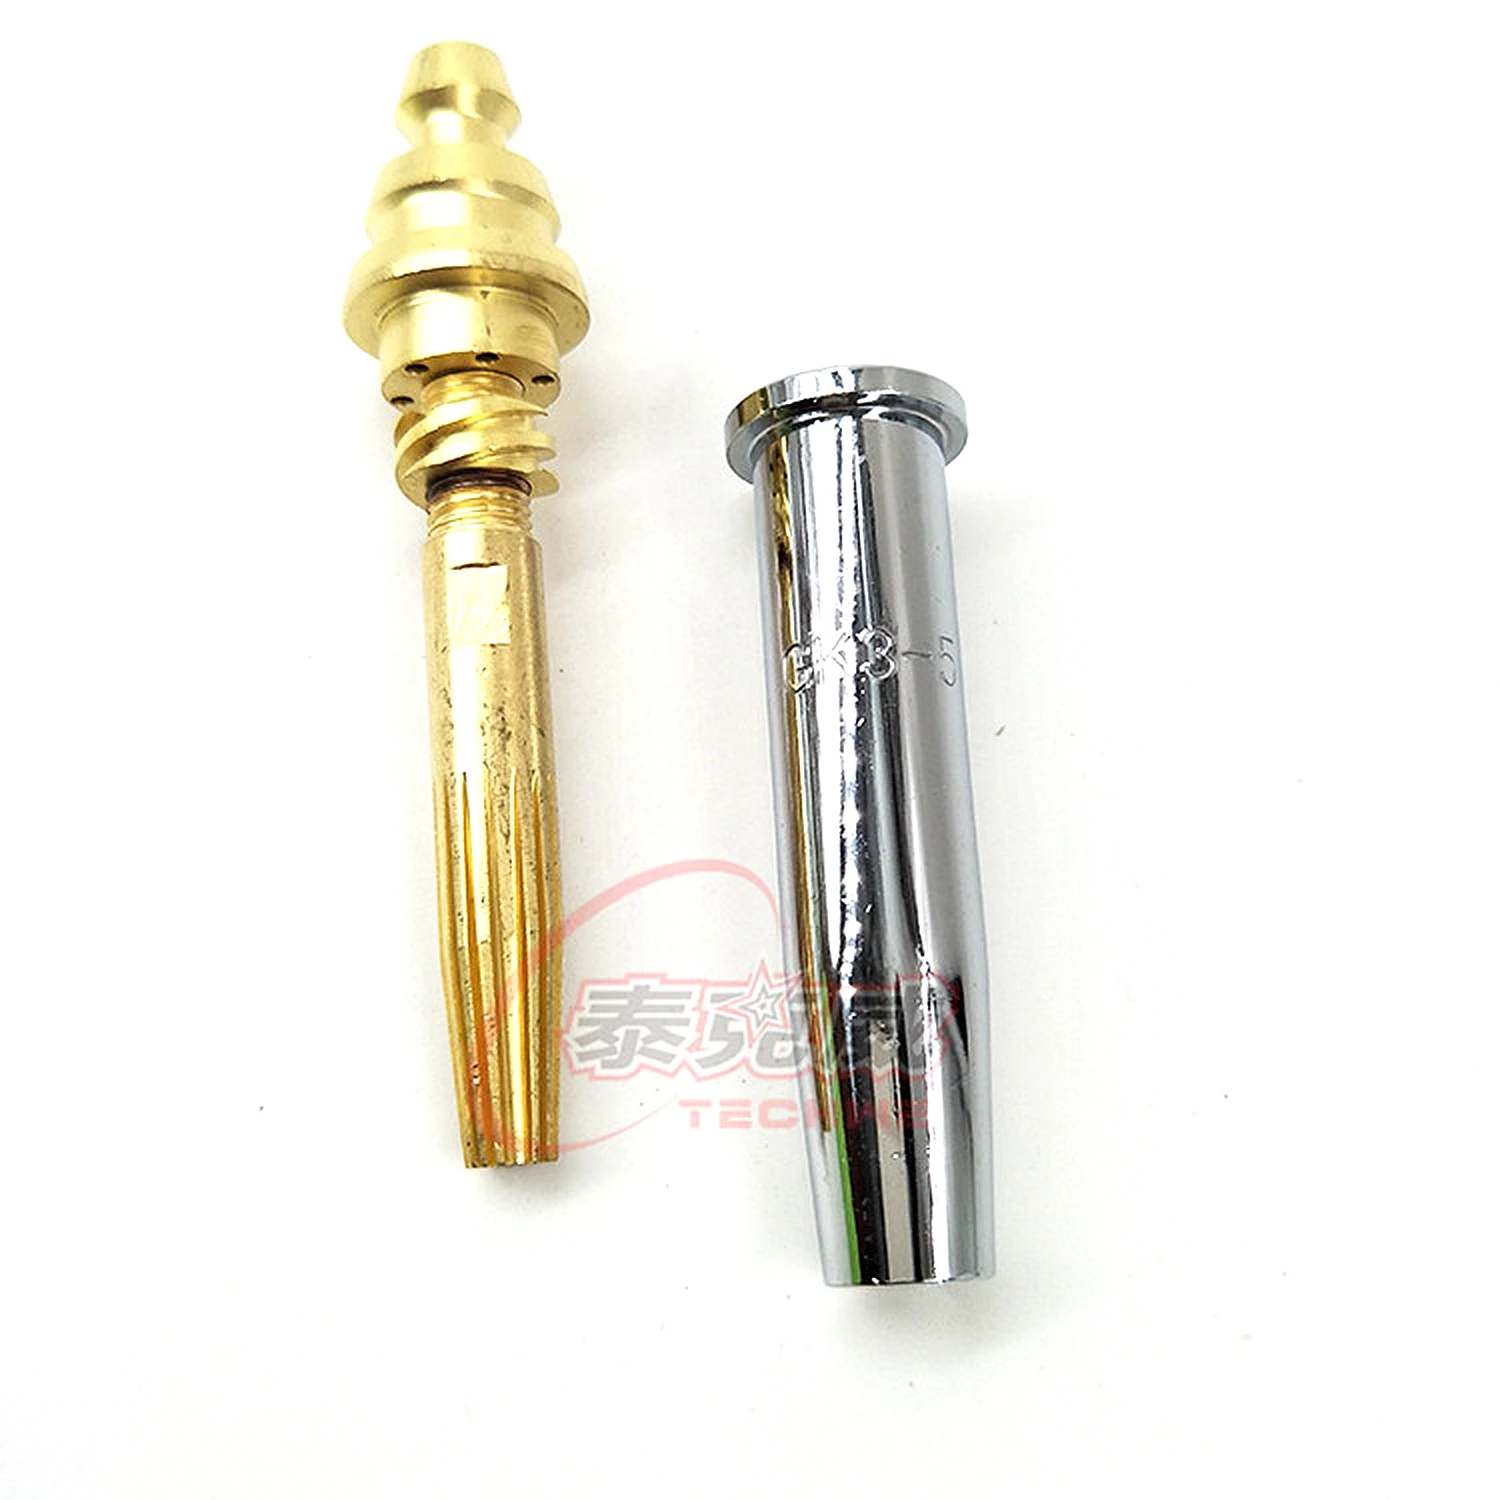 GK3 Propane Flame Gas Cutting Machine Tip Nozzle Cyclone Rapid Isobaric Type 1 Piece